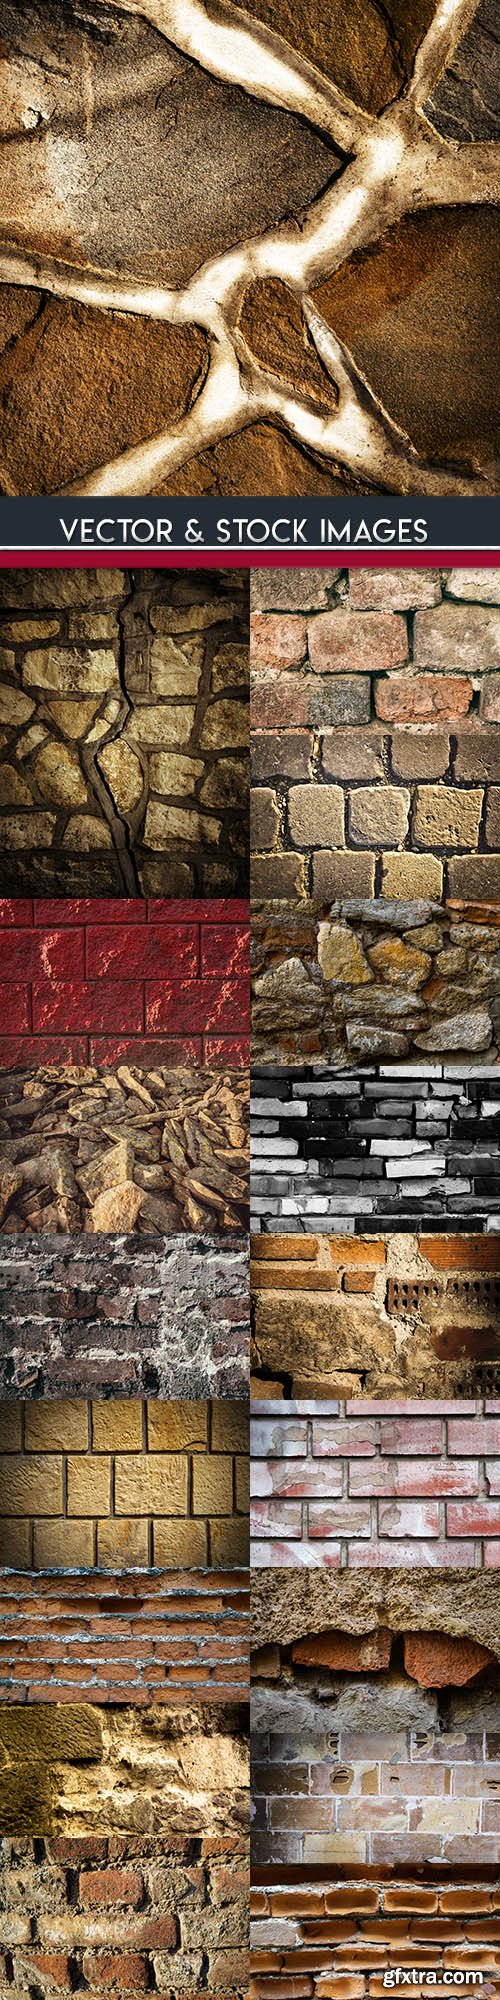 Old brick and stone wall grunge material background